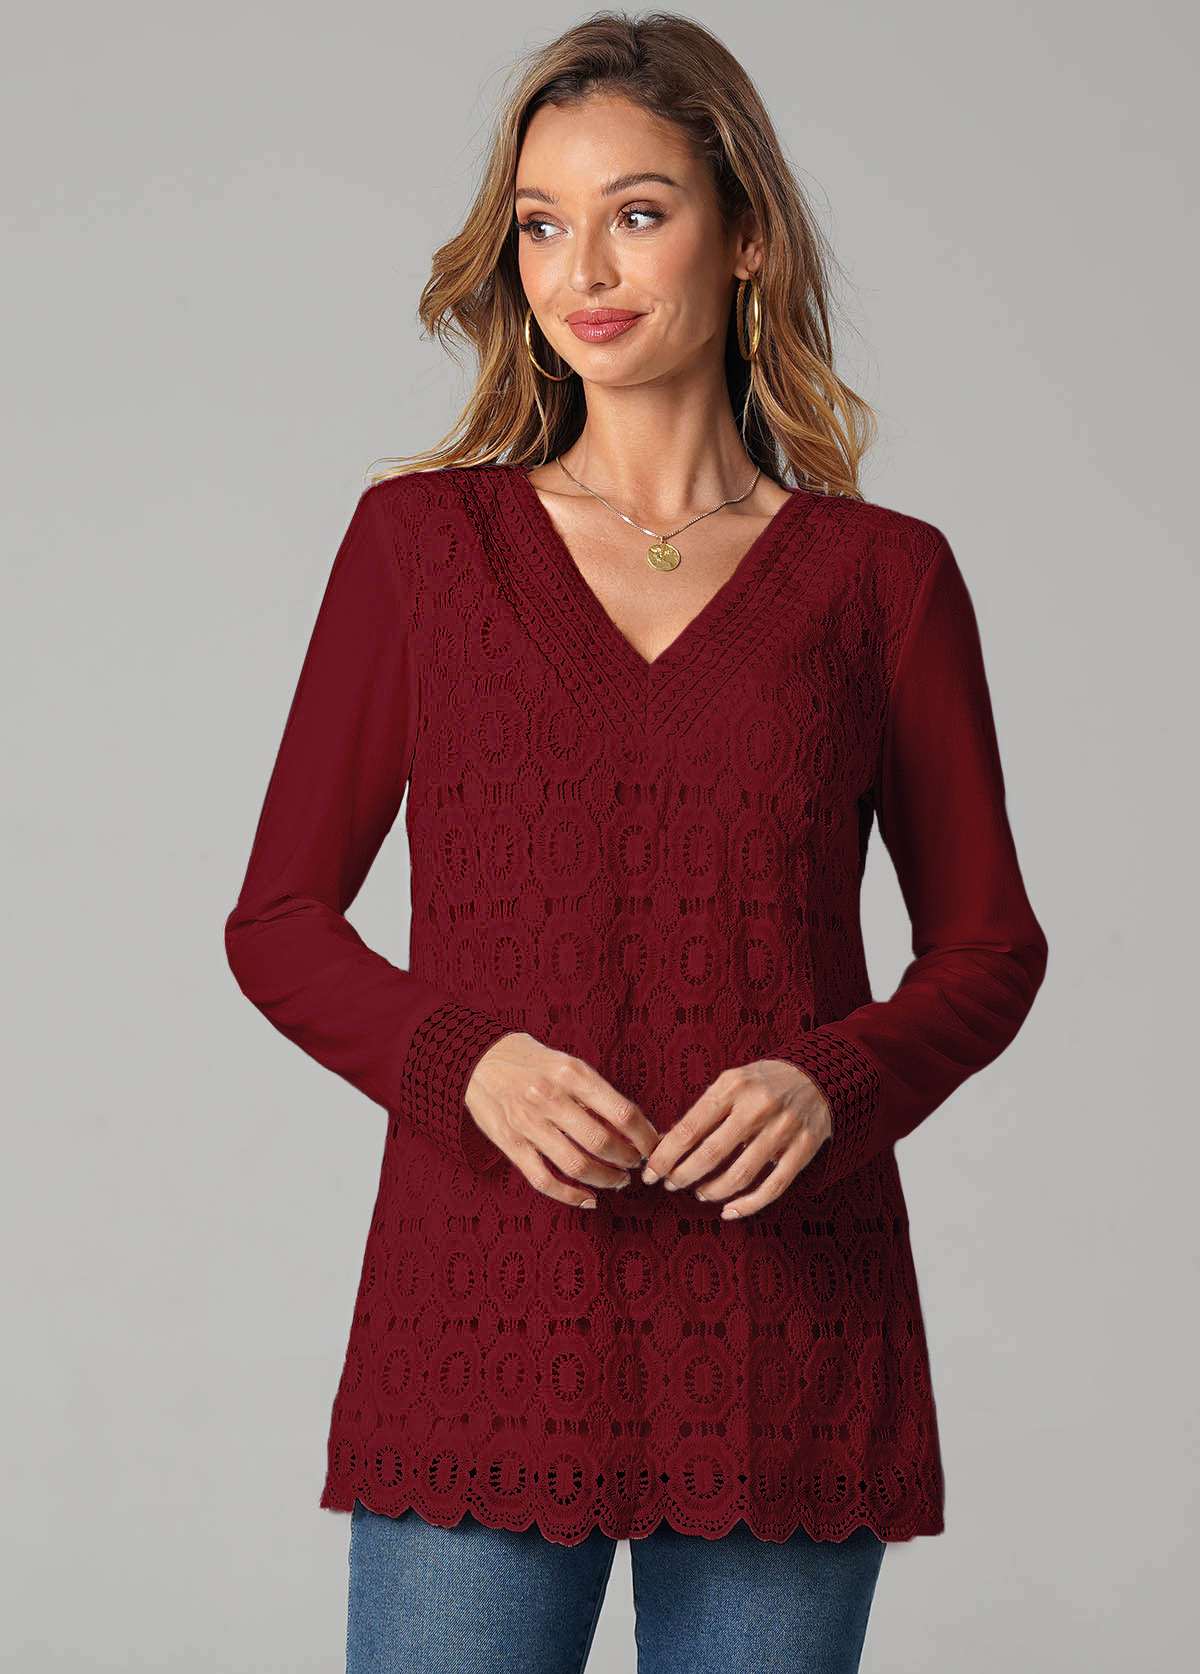 Lace Panel V Neck Wine Red T Shirt